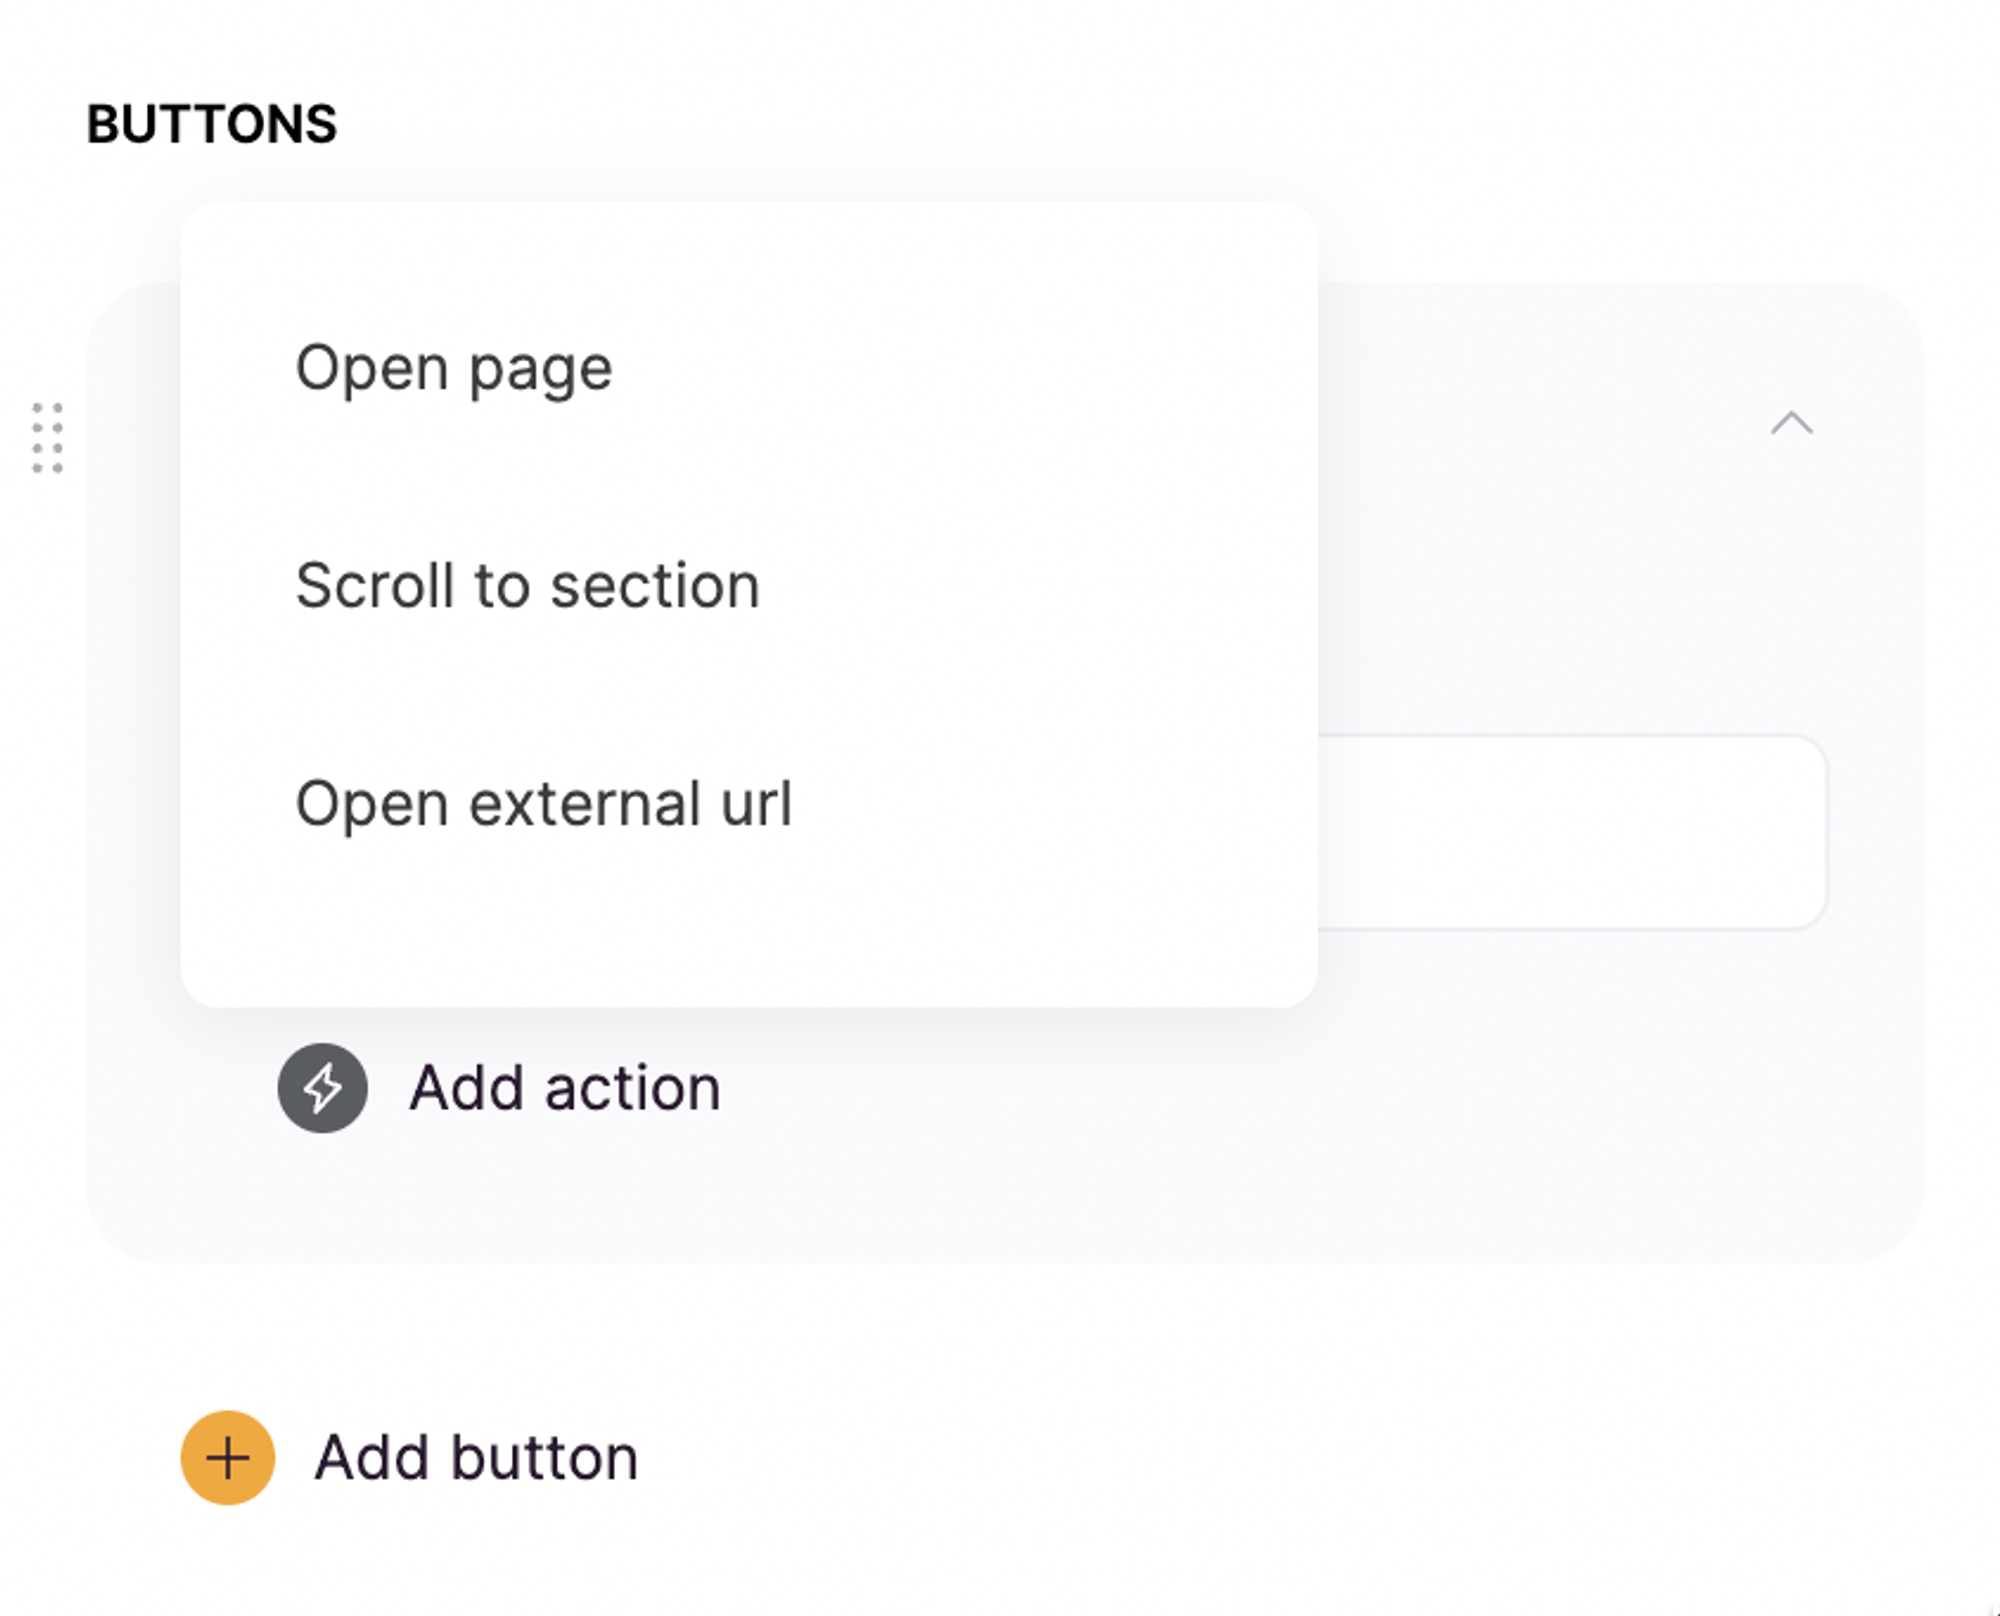 Button actions